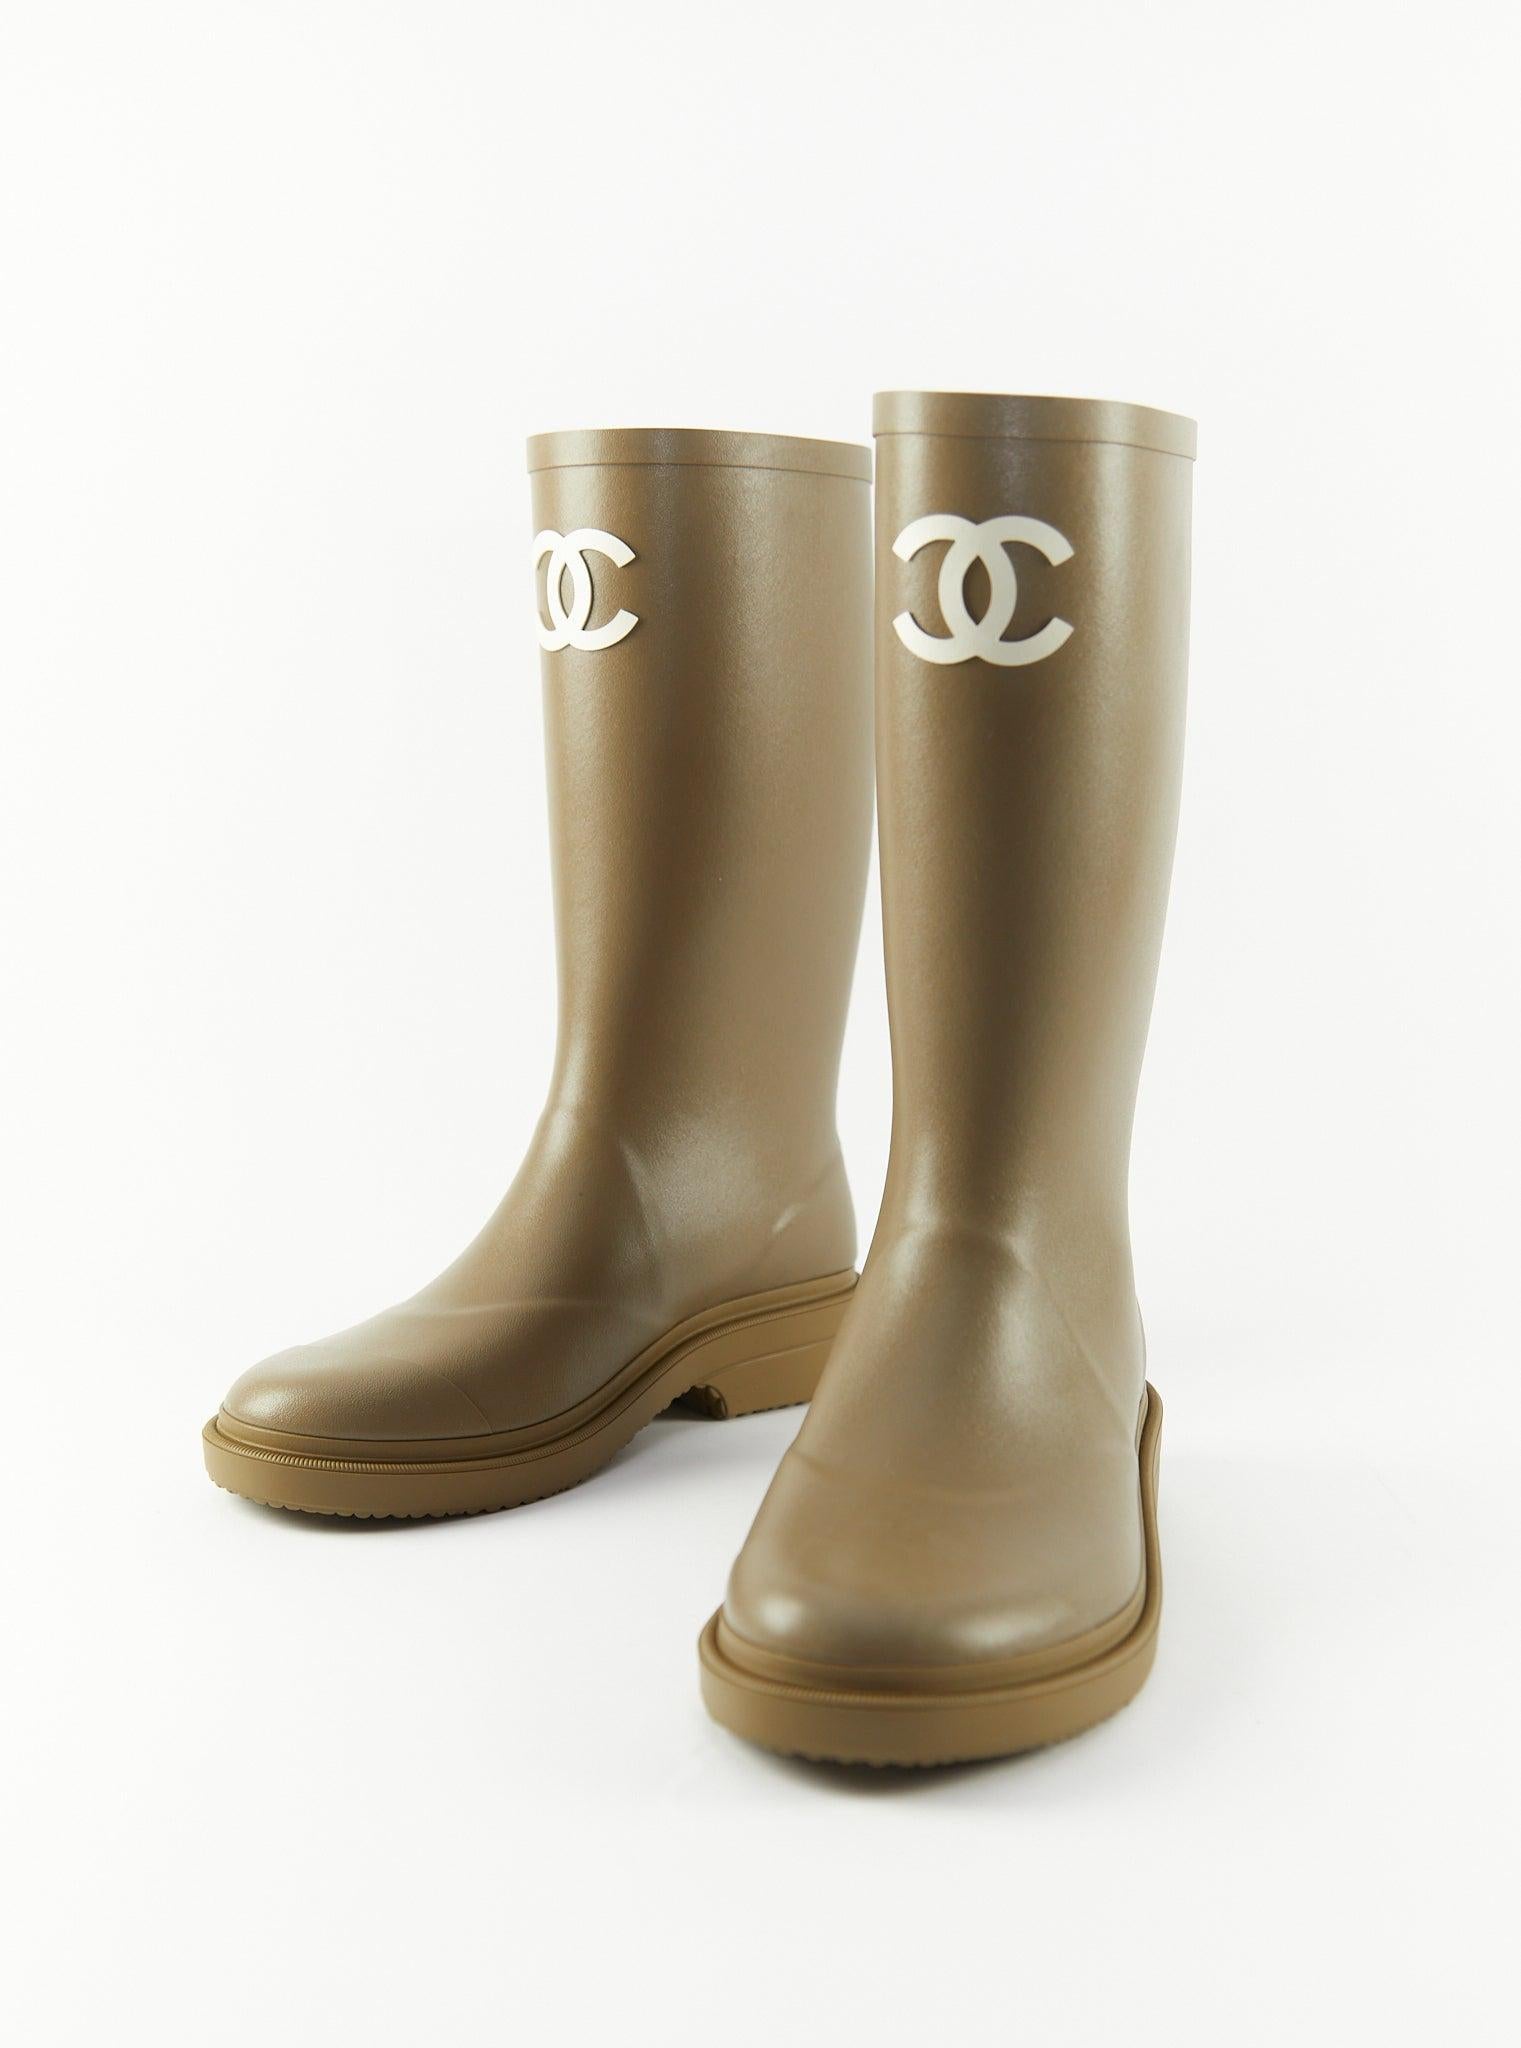 CHANEL WELLIES Khaki - Size 38 In Excellent Condition For Sale In London, GB